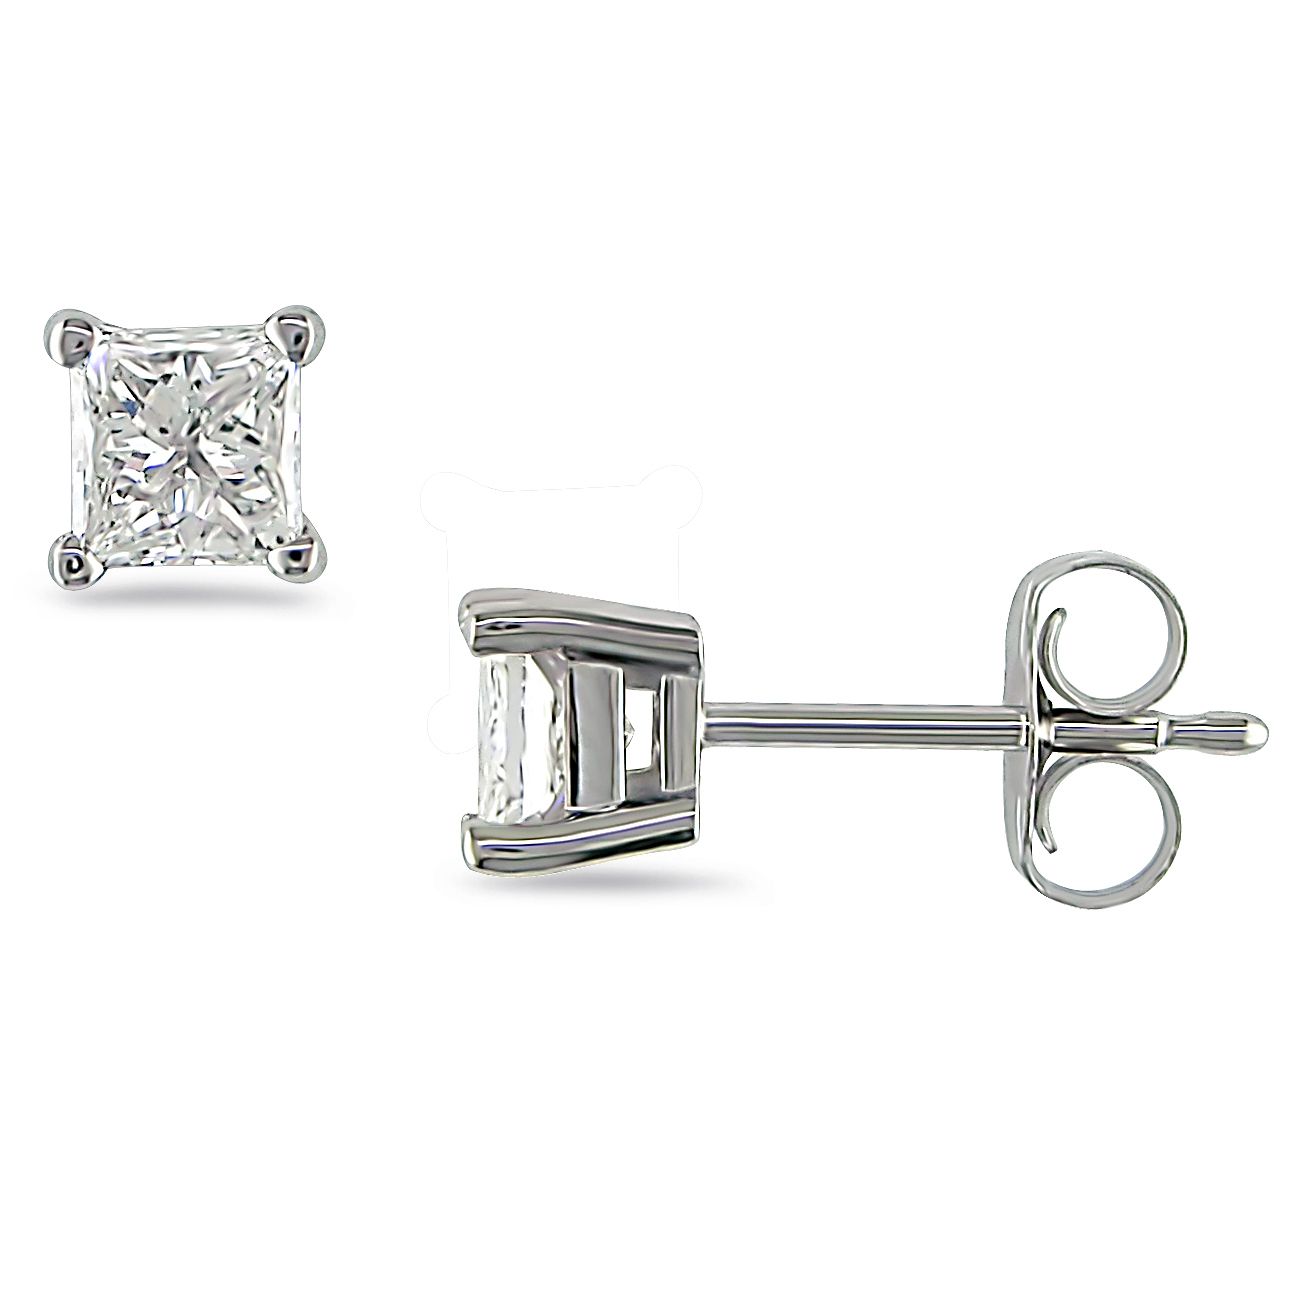 3/4 CT Princess Cut Solitaire Earrings Set in 14K White Gold (G-H I1-I2)